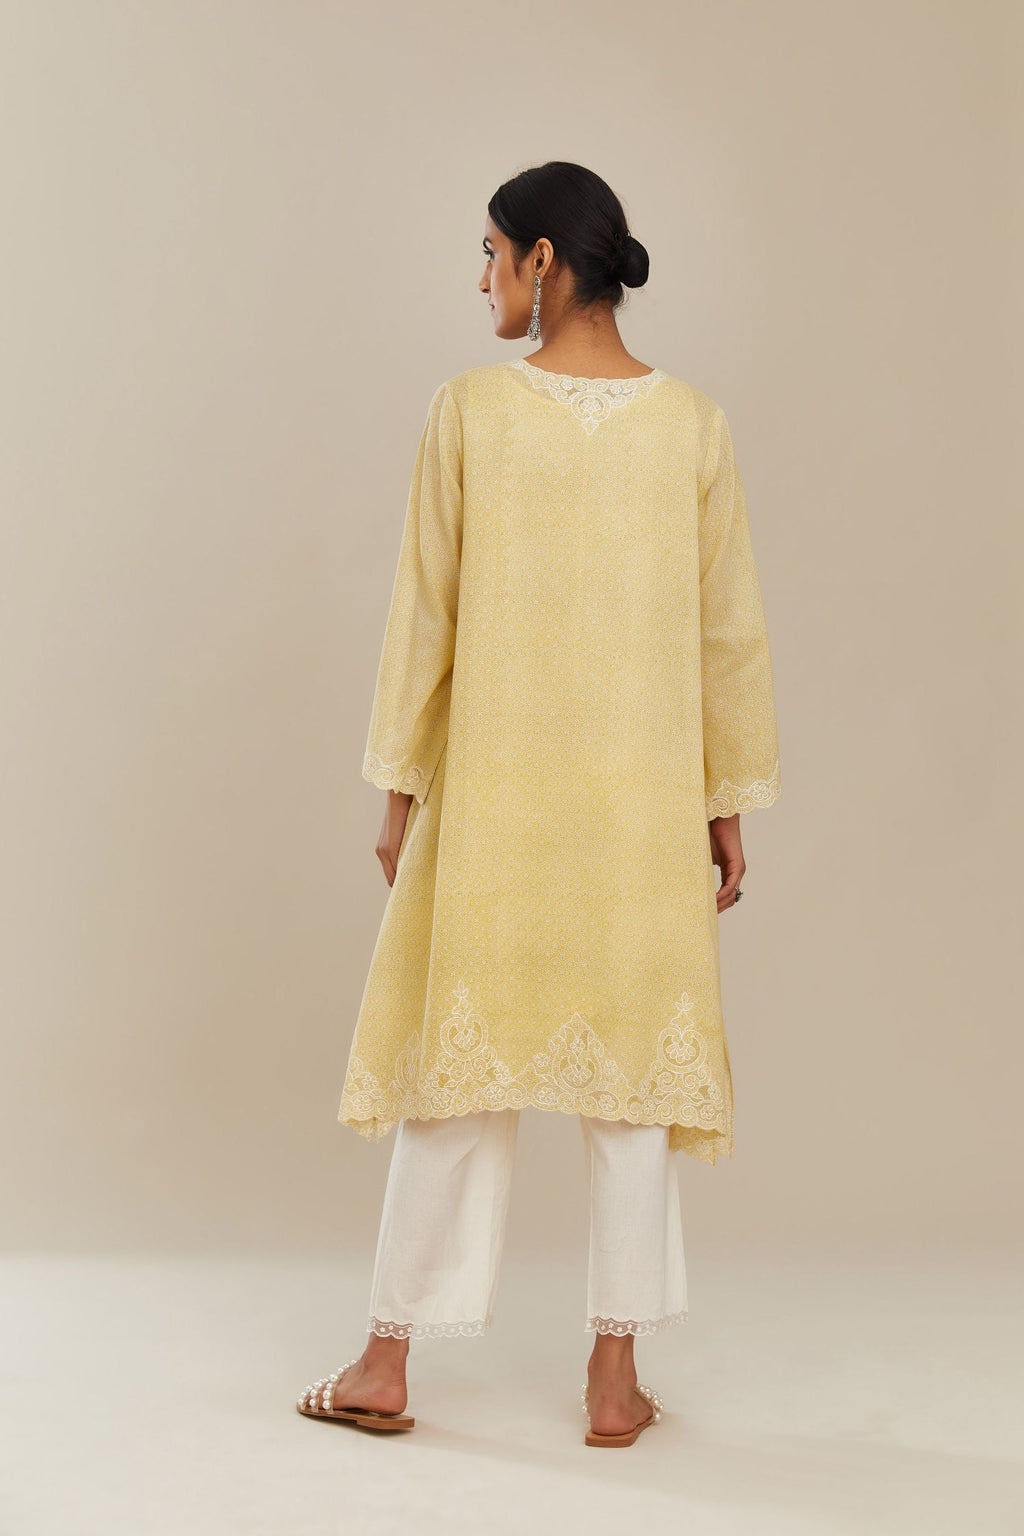 A-line hand block over-printed yellow kurta set with bell sleeves and cutwork embroidery with sequins.